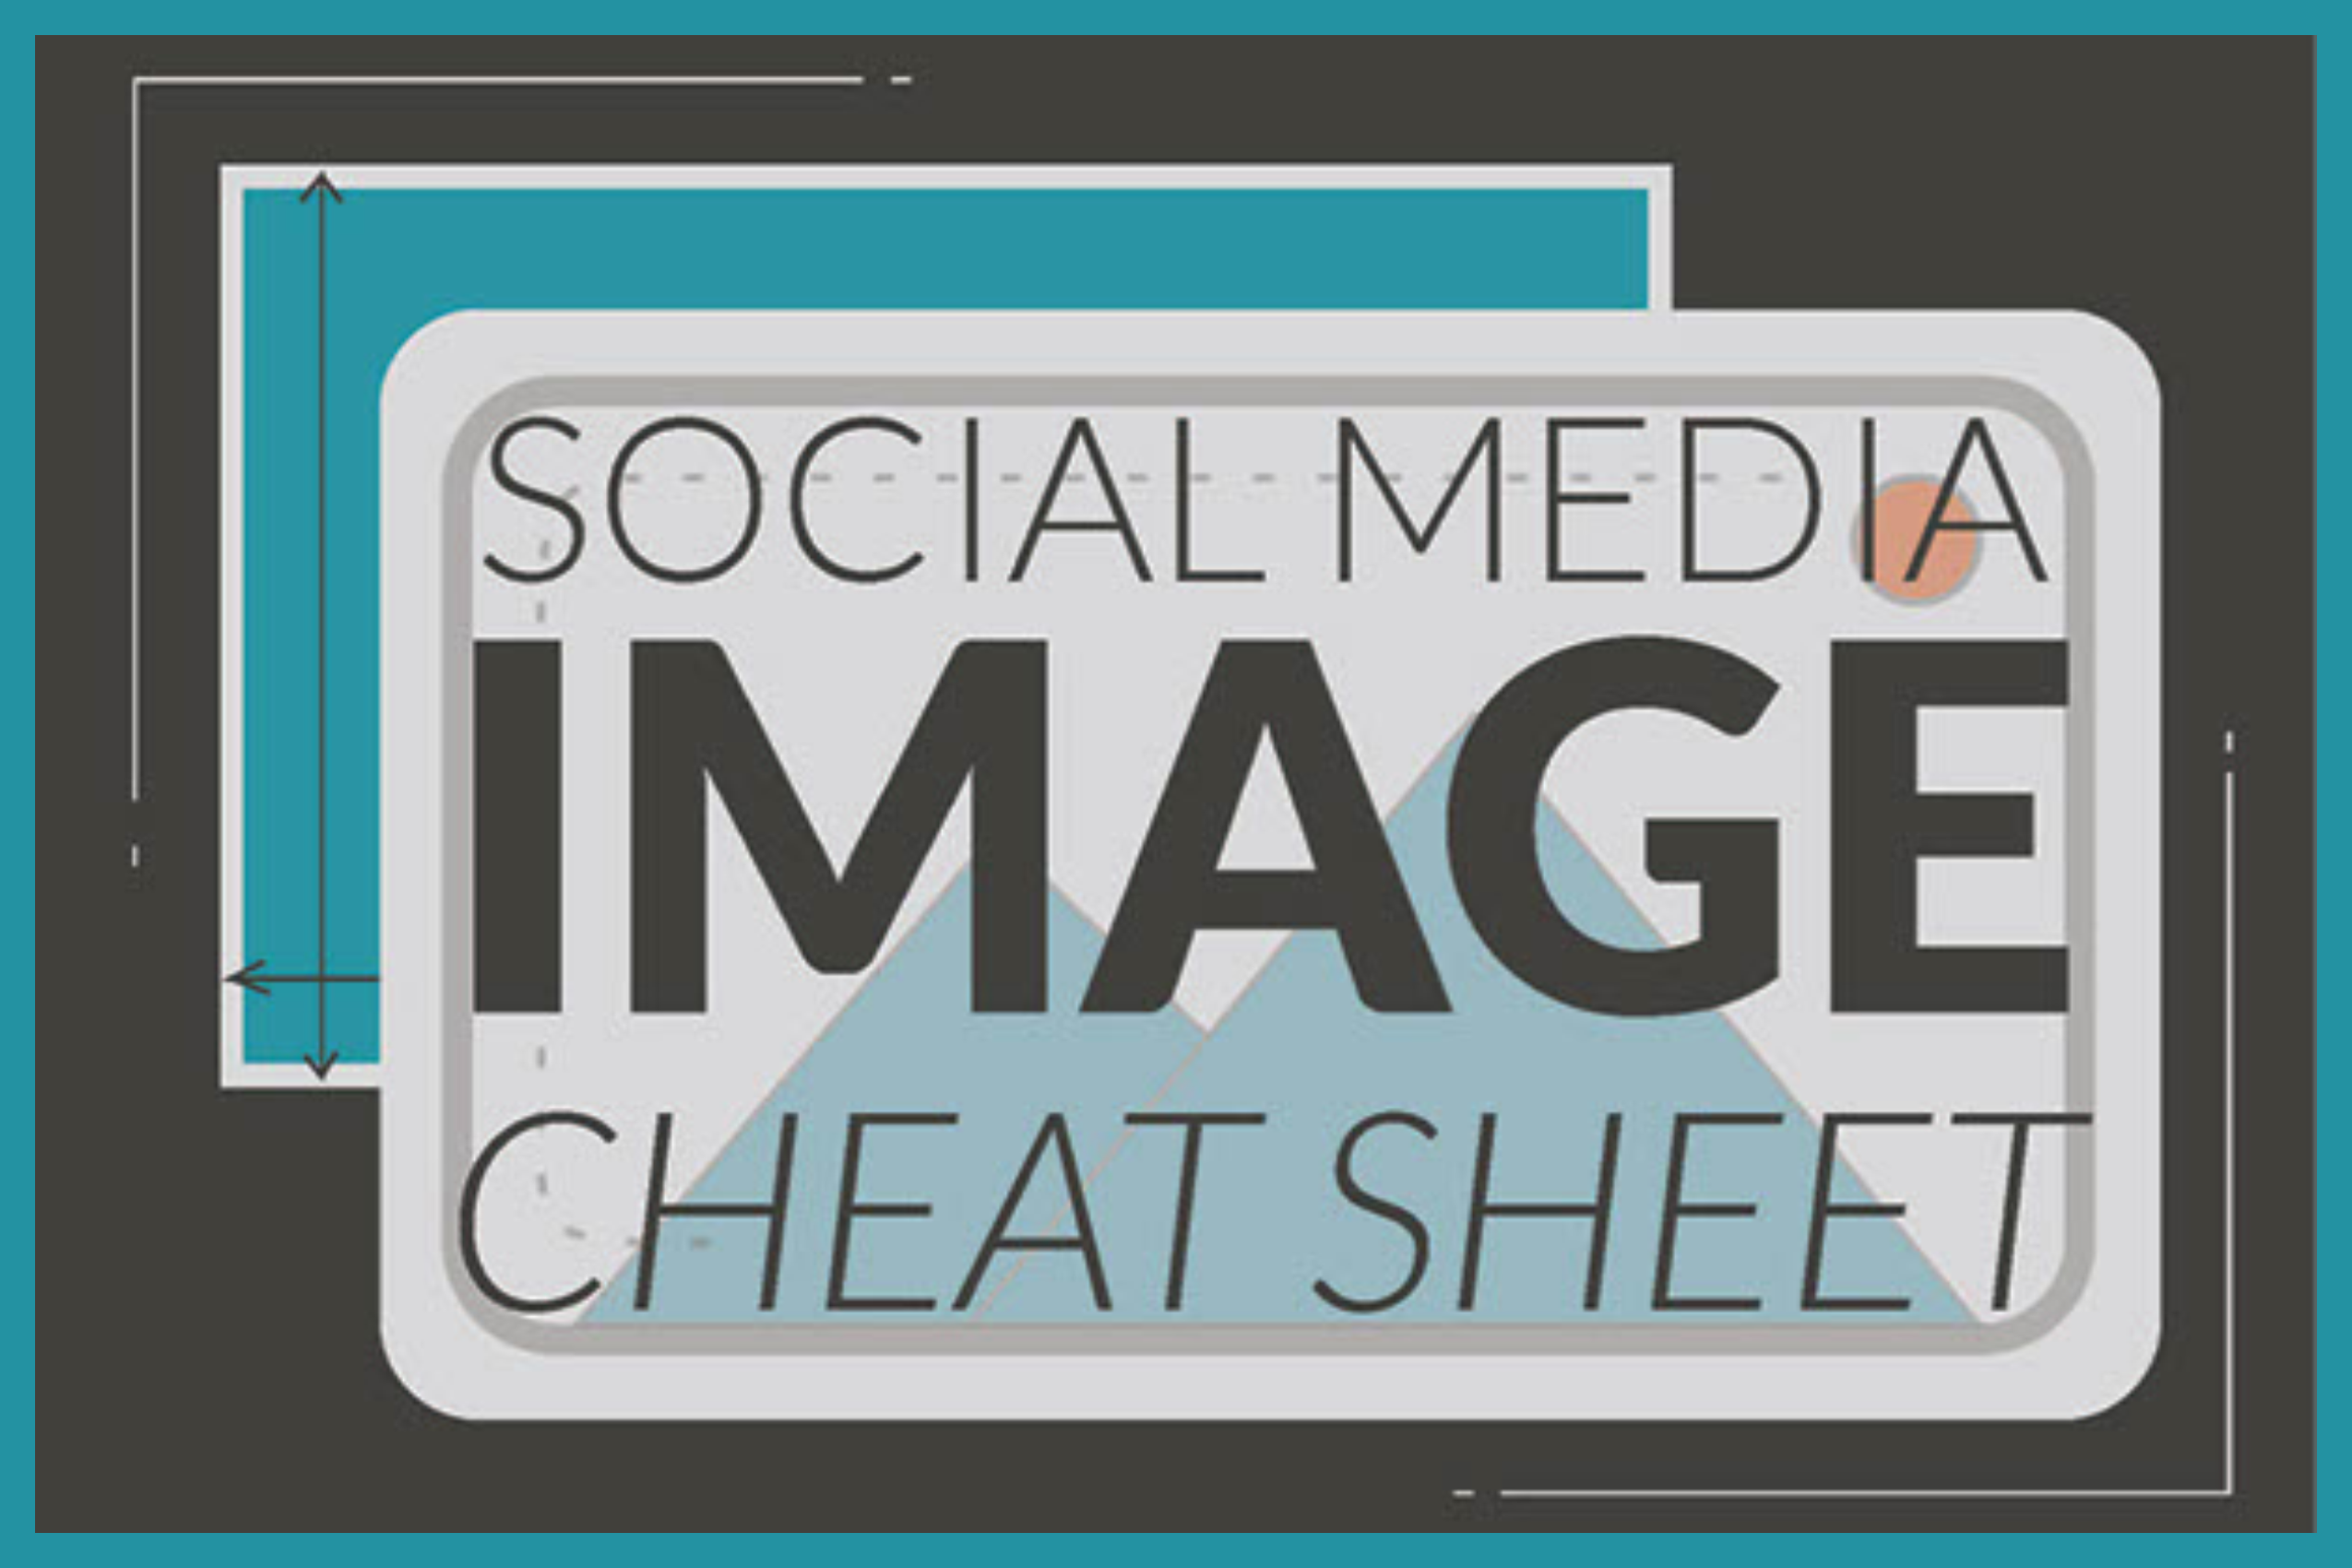 Social Media Image Size Cheat Sheet (infographic)